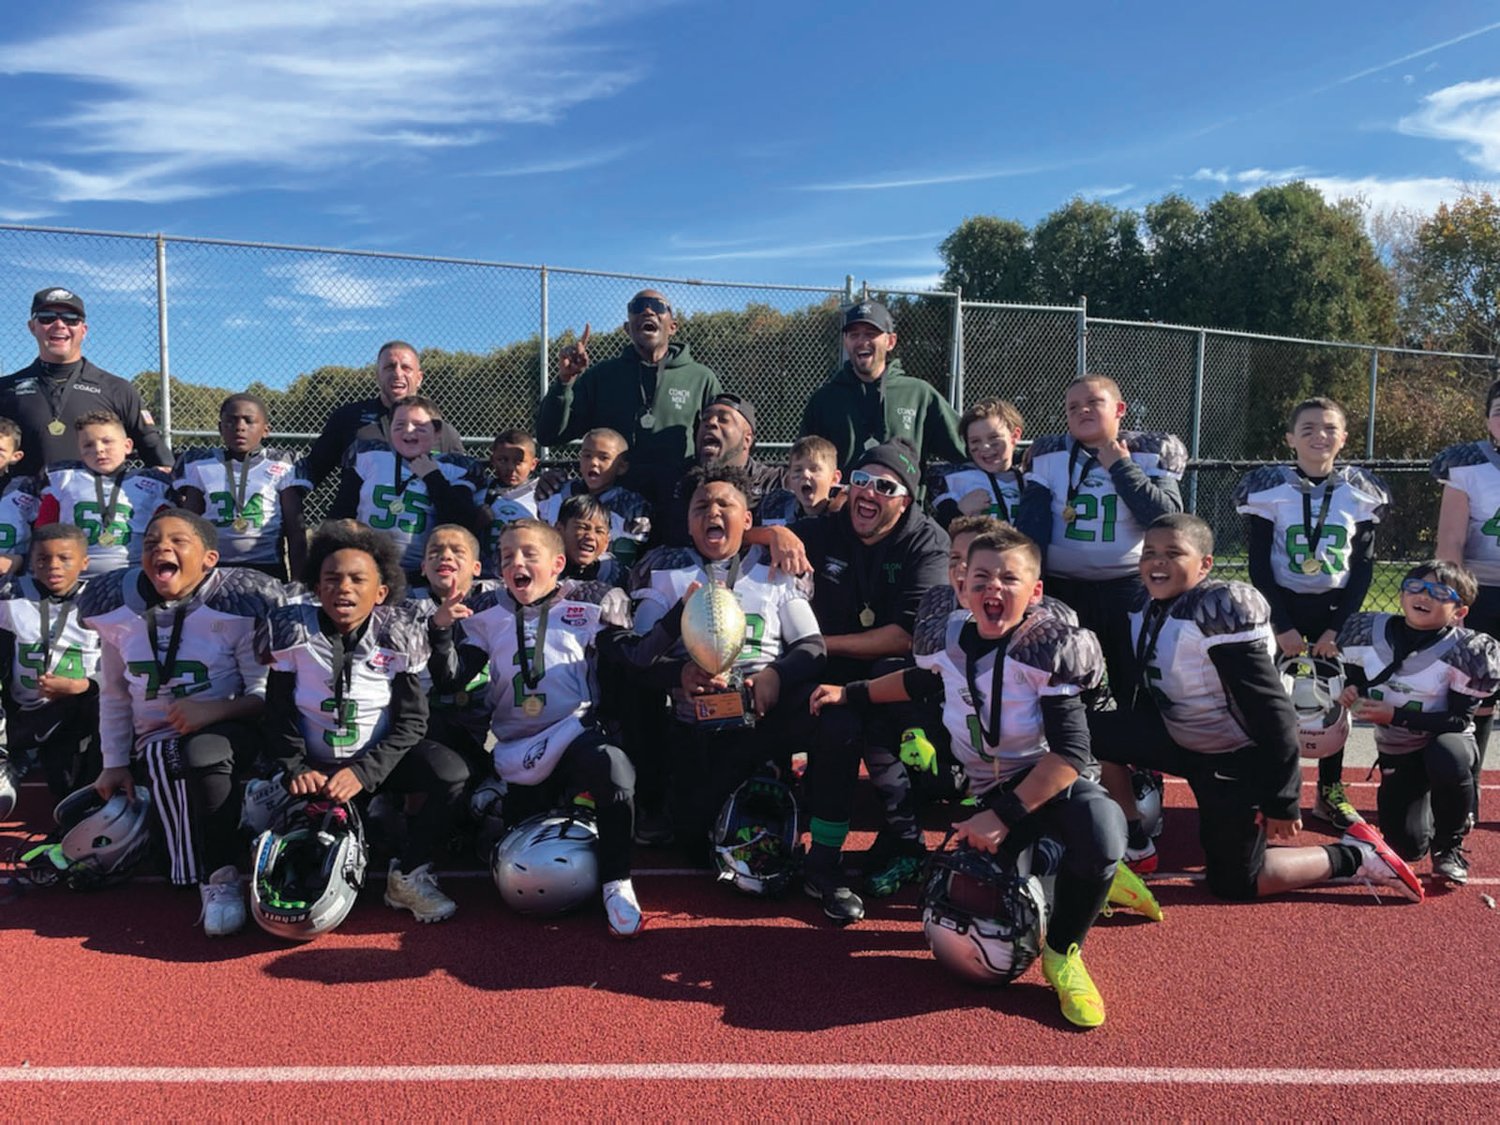 FLY, EAGLES, FLY: The Edgewood Eagles 8-U team after winning the state championship.